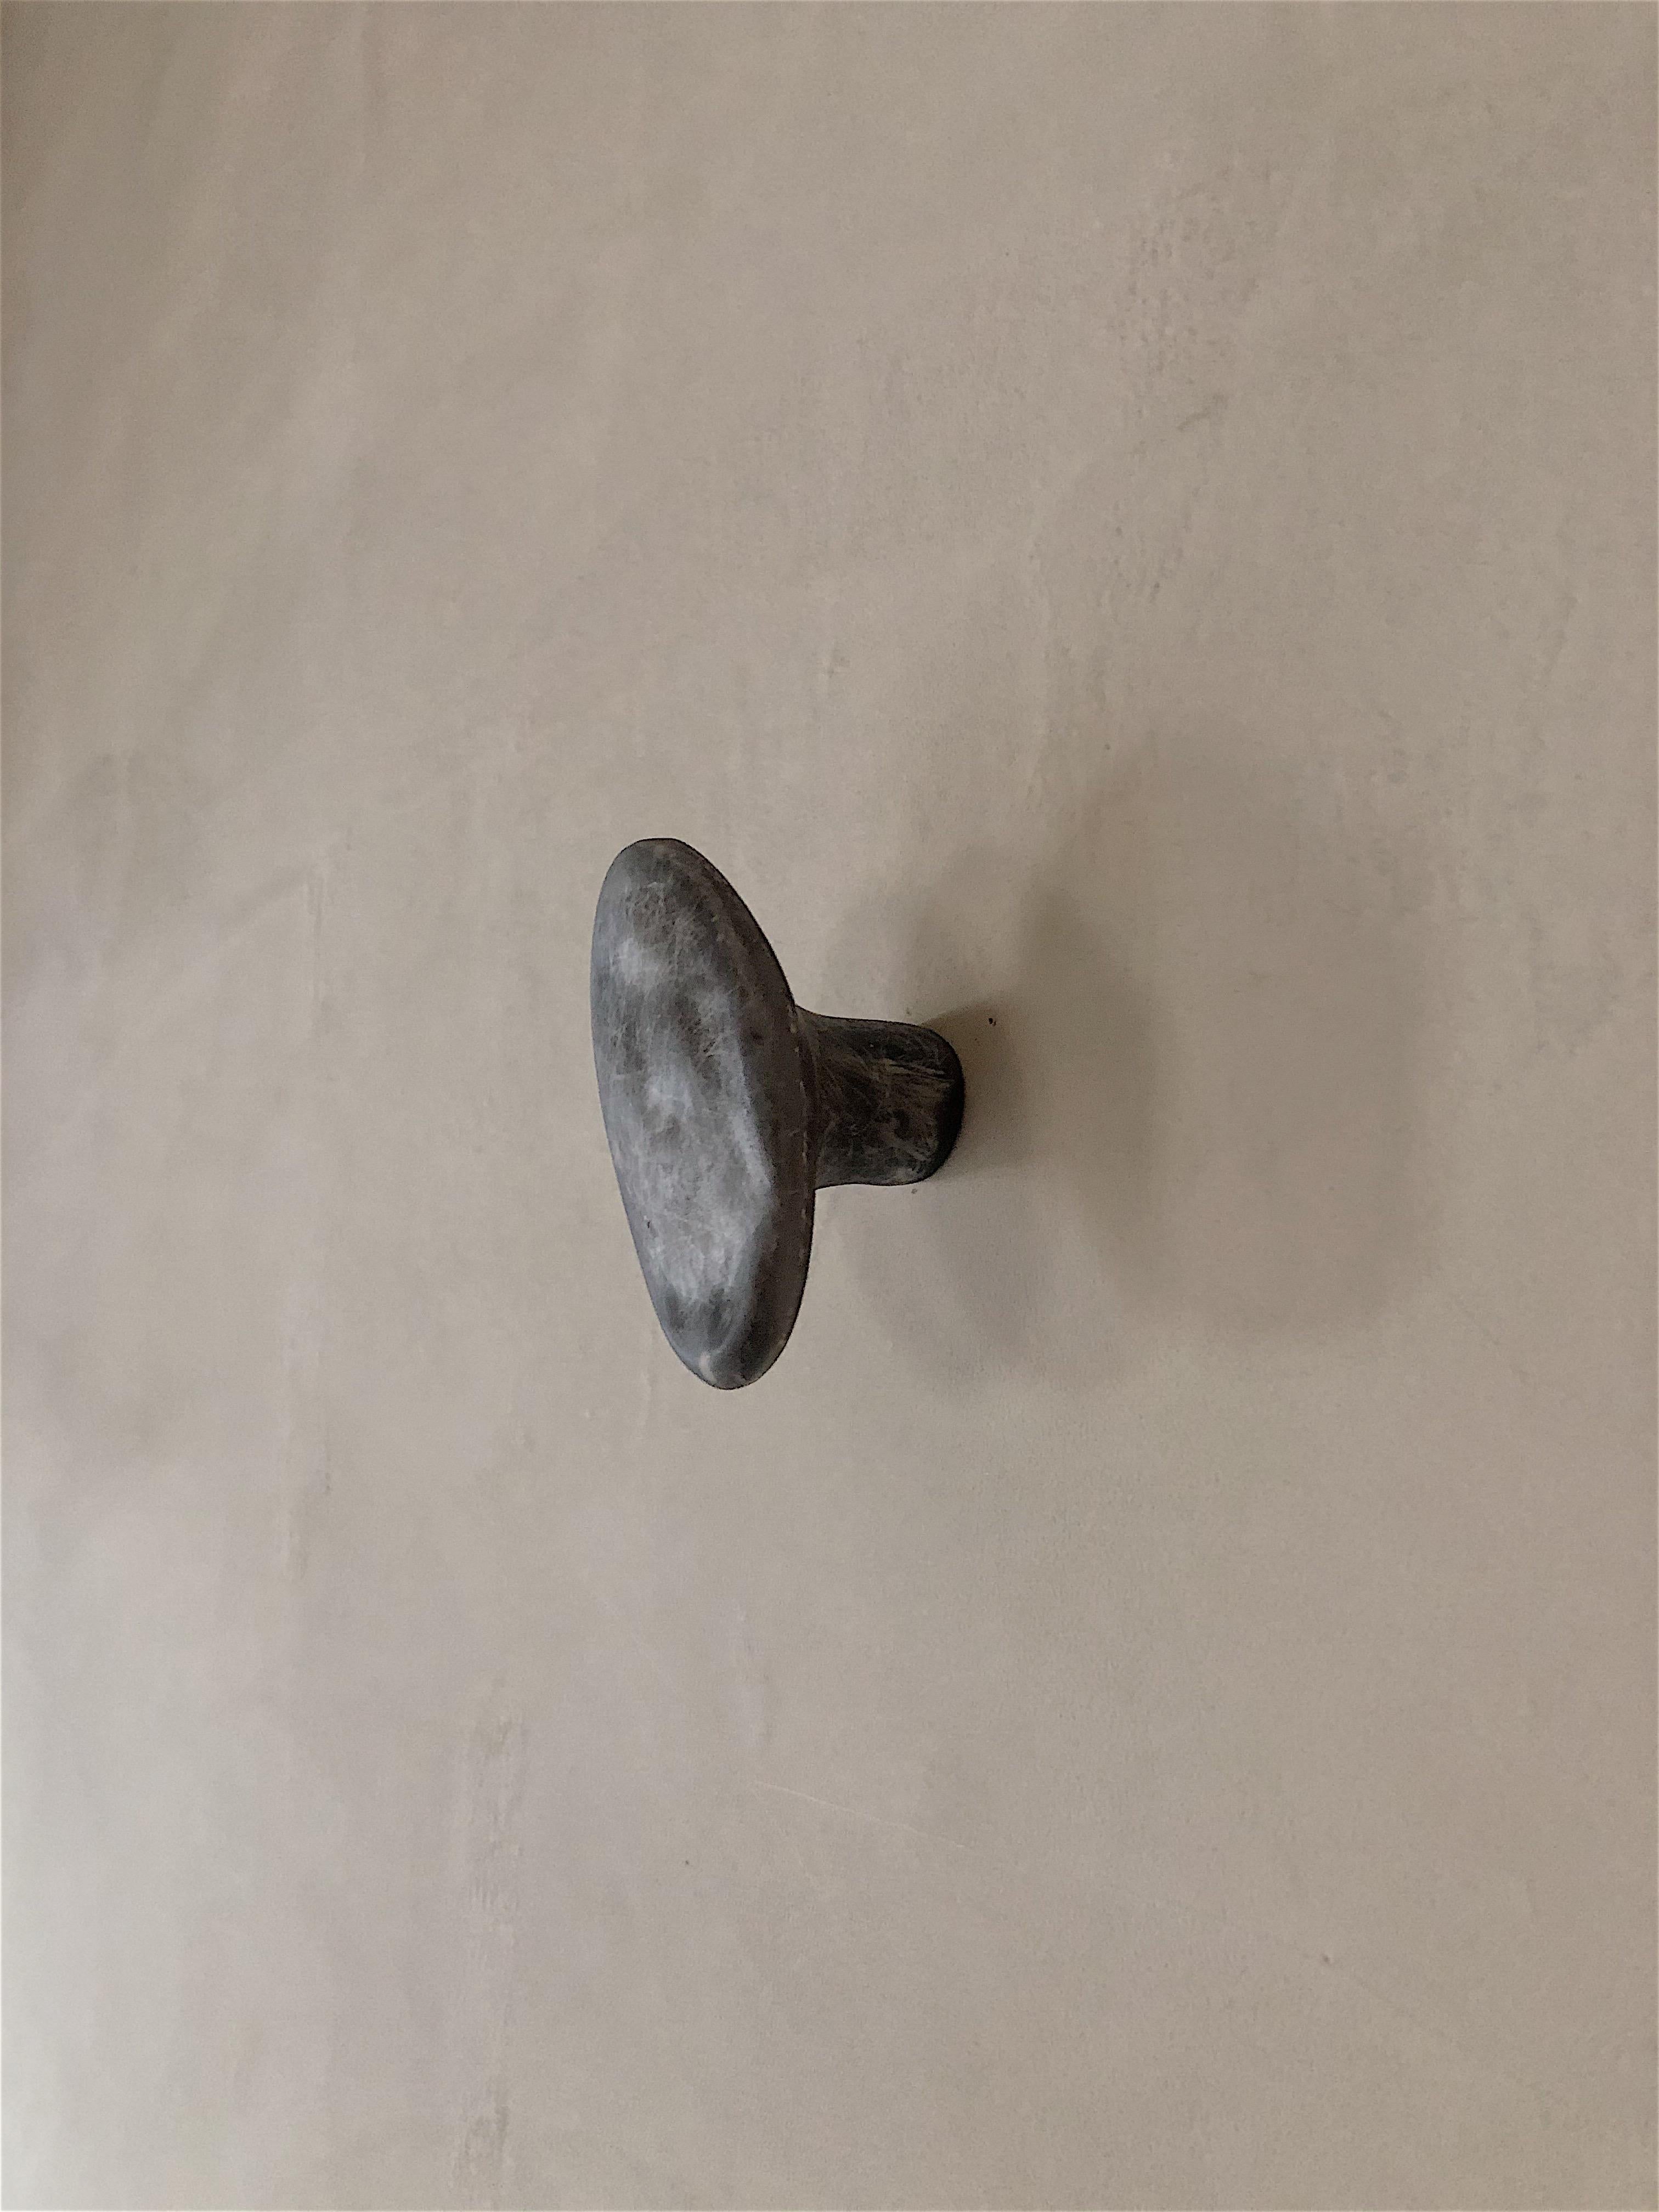 Cobble hook by Karstudio.
Dimensions: W 6 x D 5.5 x H 1 cm.
Materials: FRP.
Other colors available.

Like a jade in the rough, it could be use as a hook or door handle; the hook with irregular lines brings fun to a monotonous line-straight